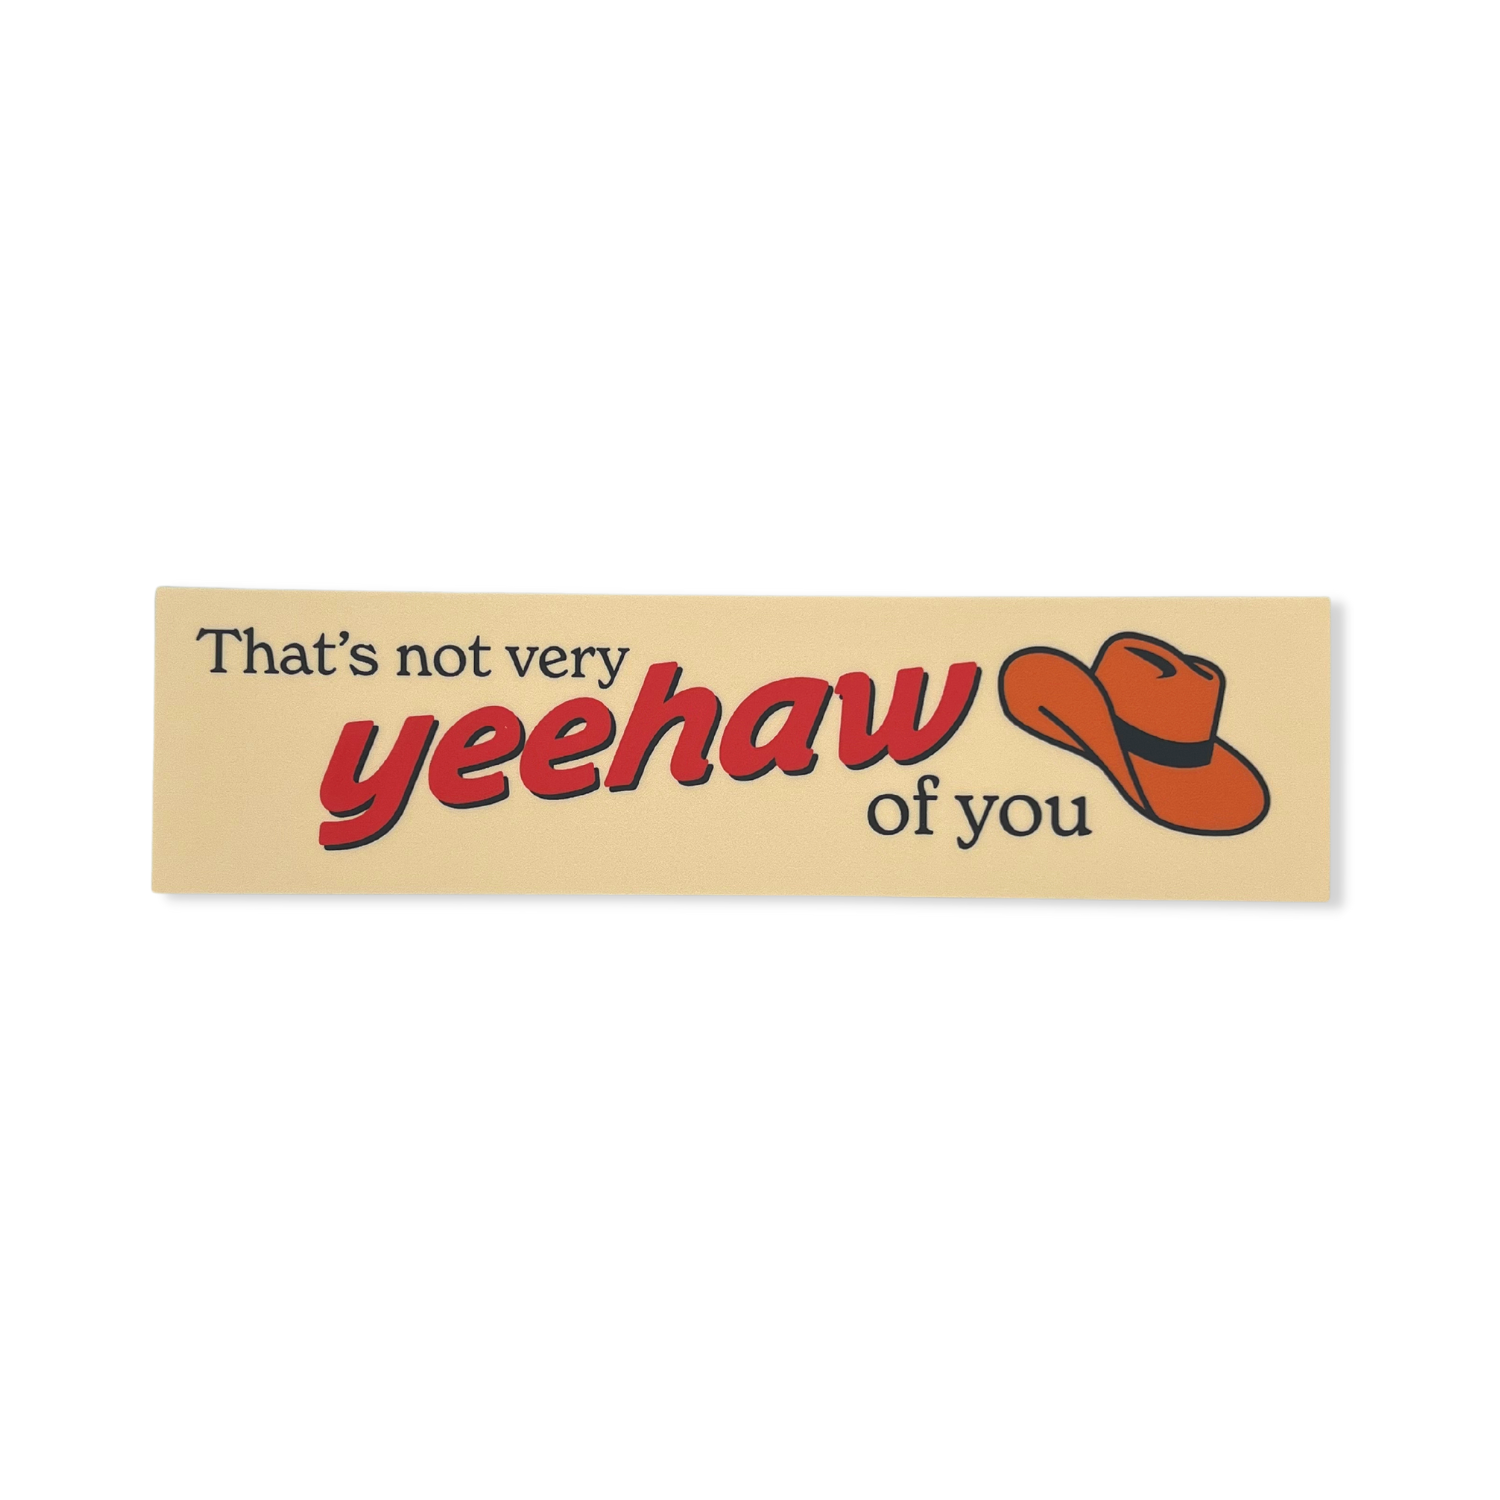 Not Very Yeehaw of You Bumper Sticker